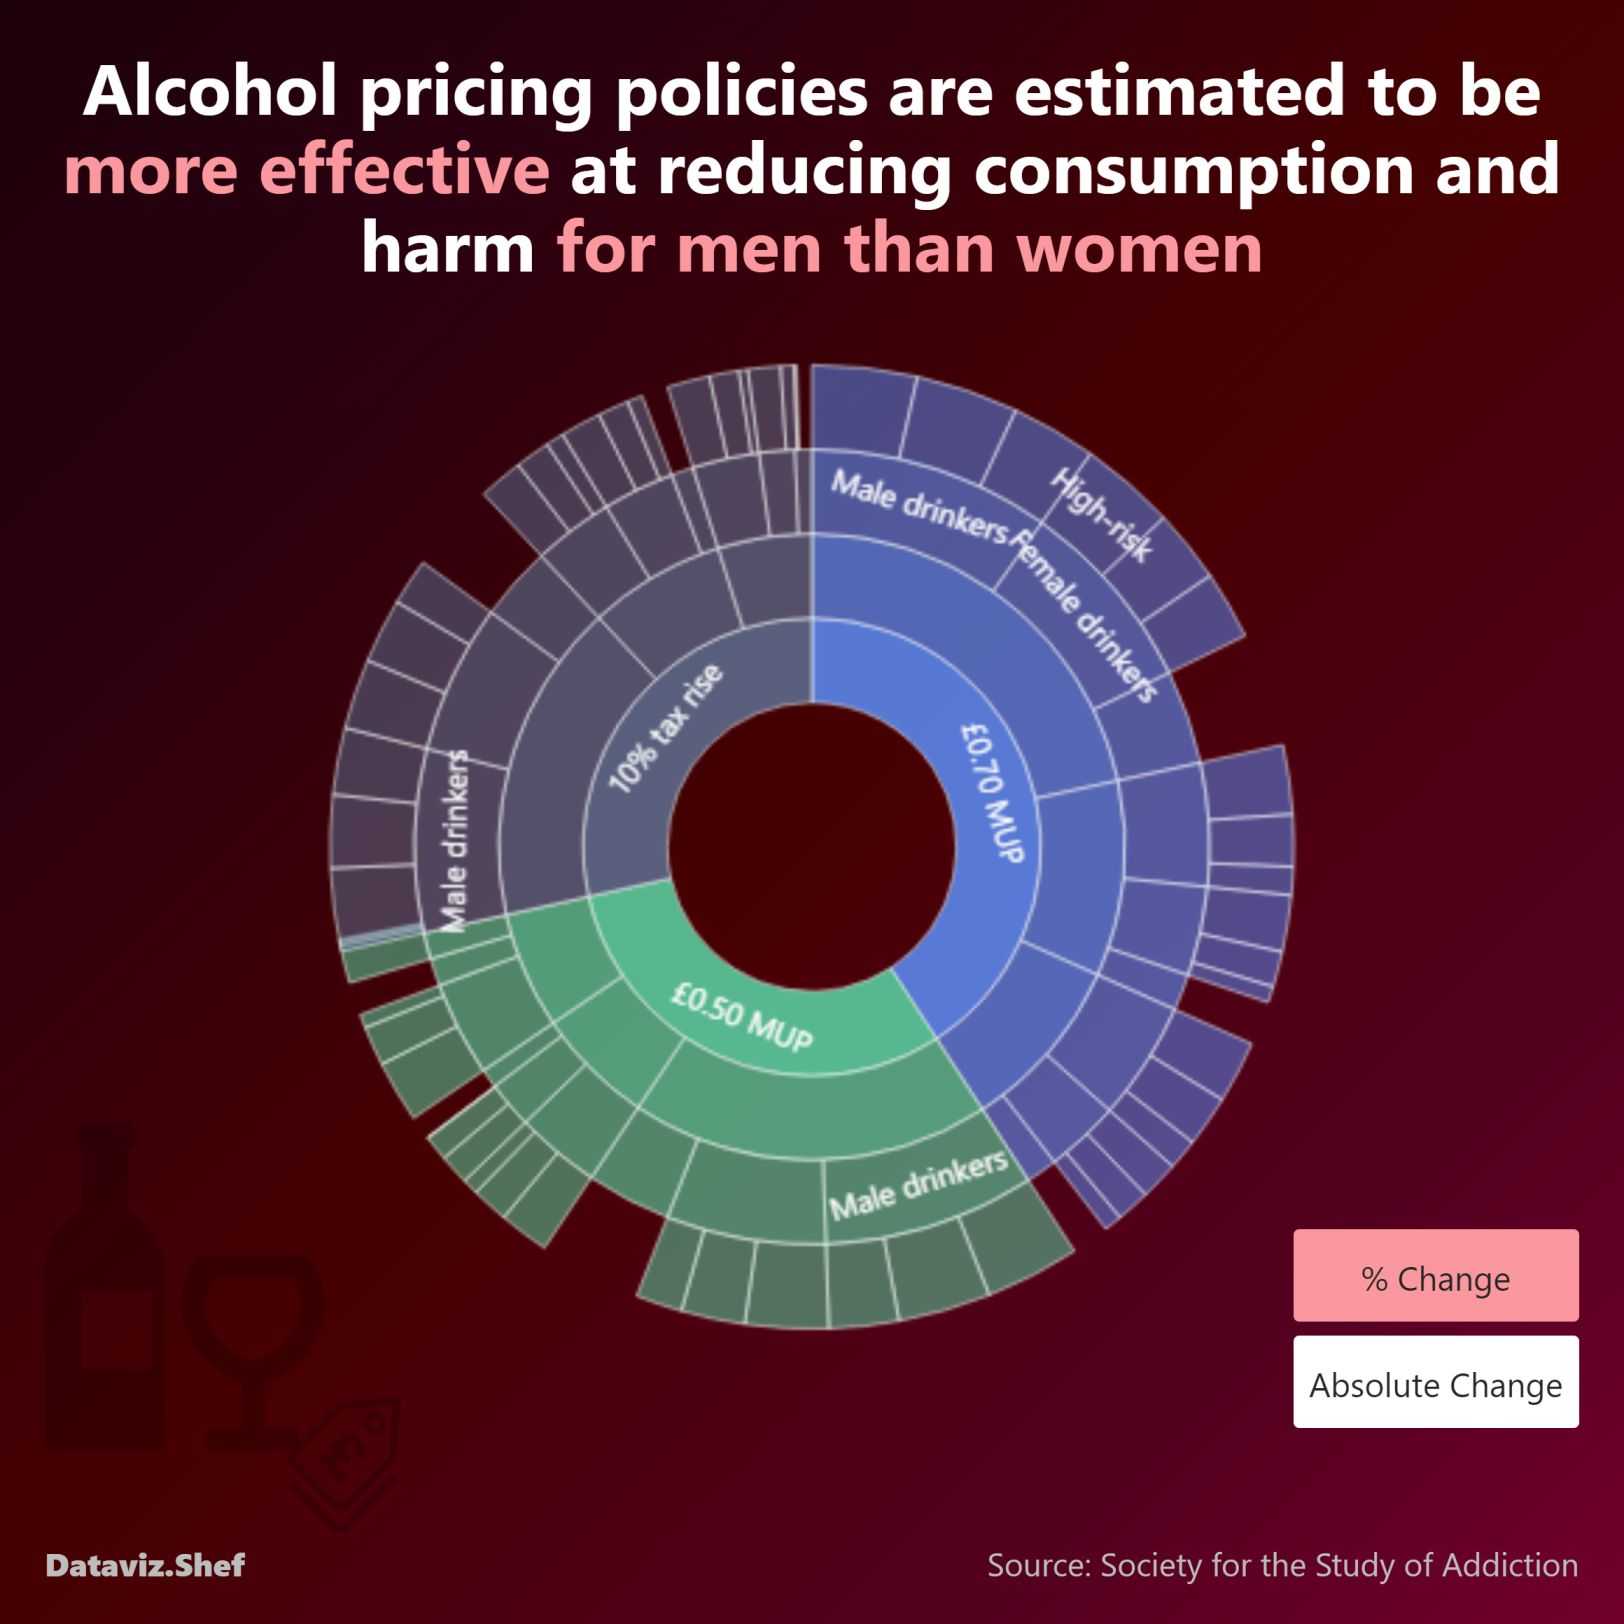 Visualisation: Alcohol pricing policies are estimated to be more effective at reducing consumption and harm for men than women